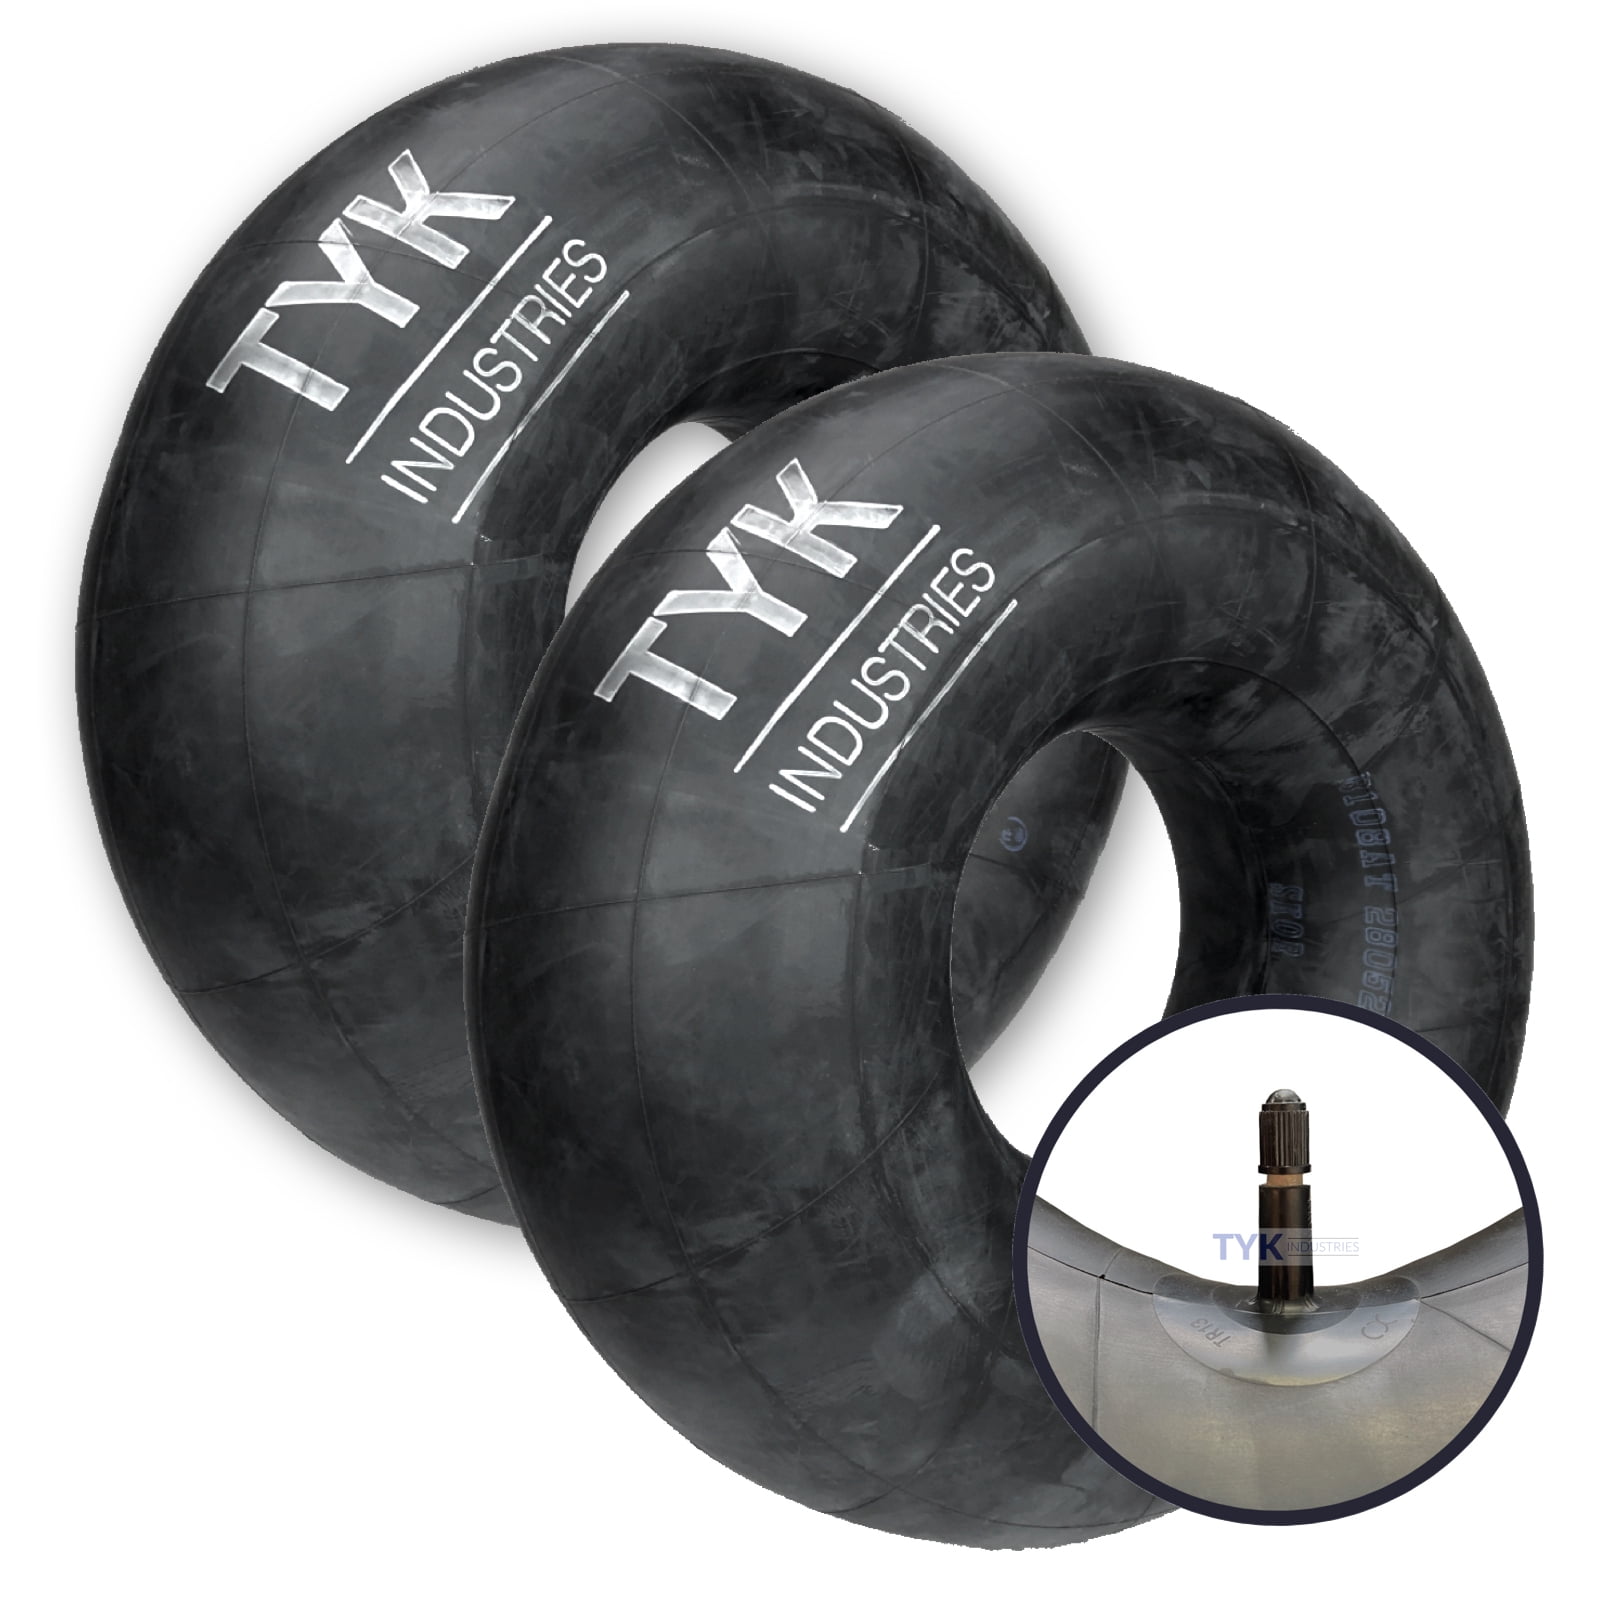 Pair of (2) Two 23x8.50-12, 23x9.50-12, 23x10.50-12 Lawn Mower Tire Inner  Tubes with TR13 Valve Stems by TYK Industries